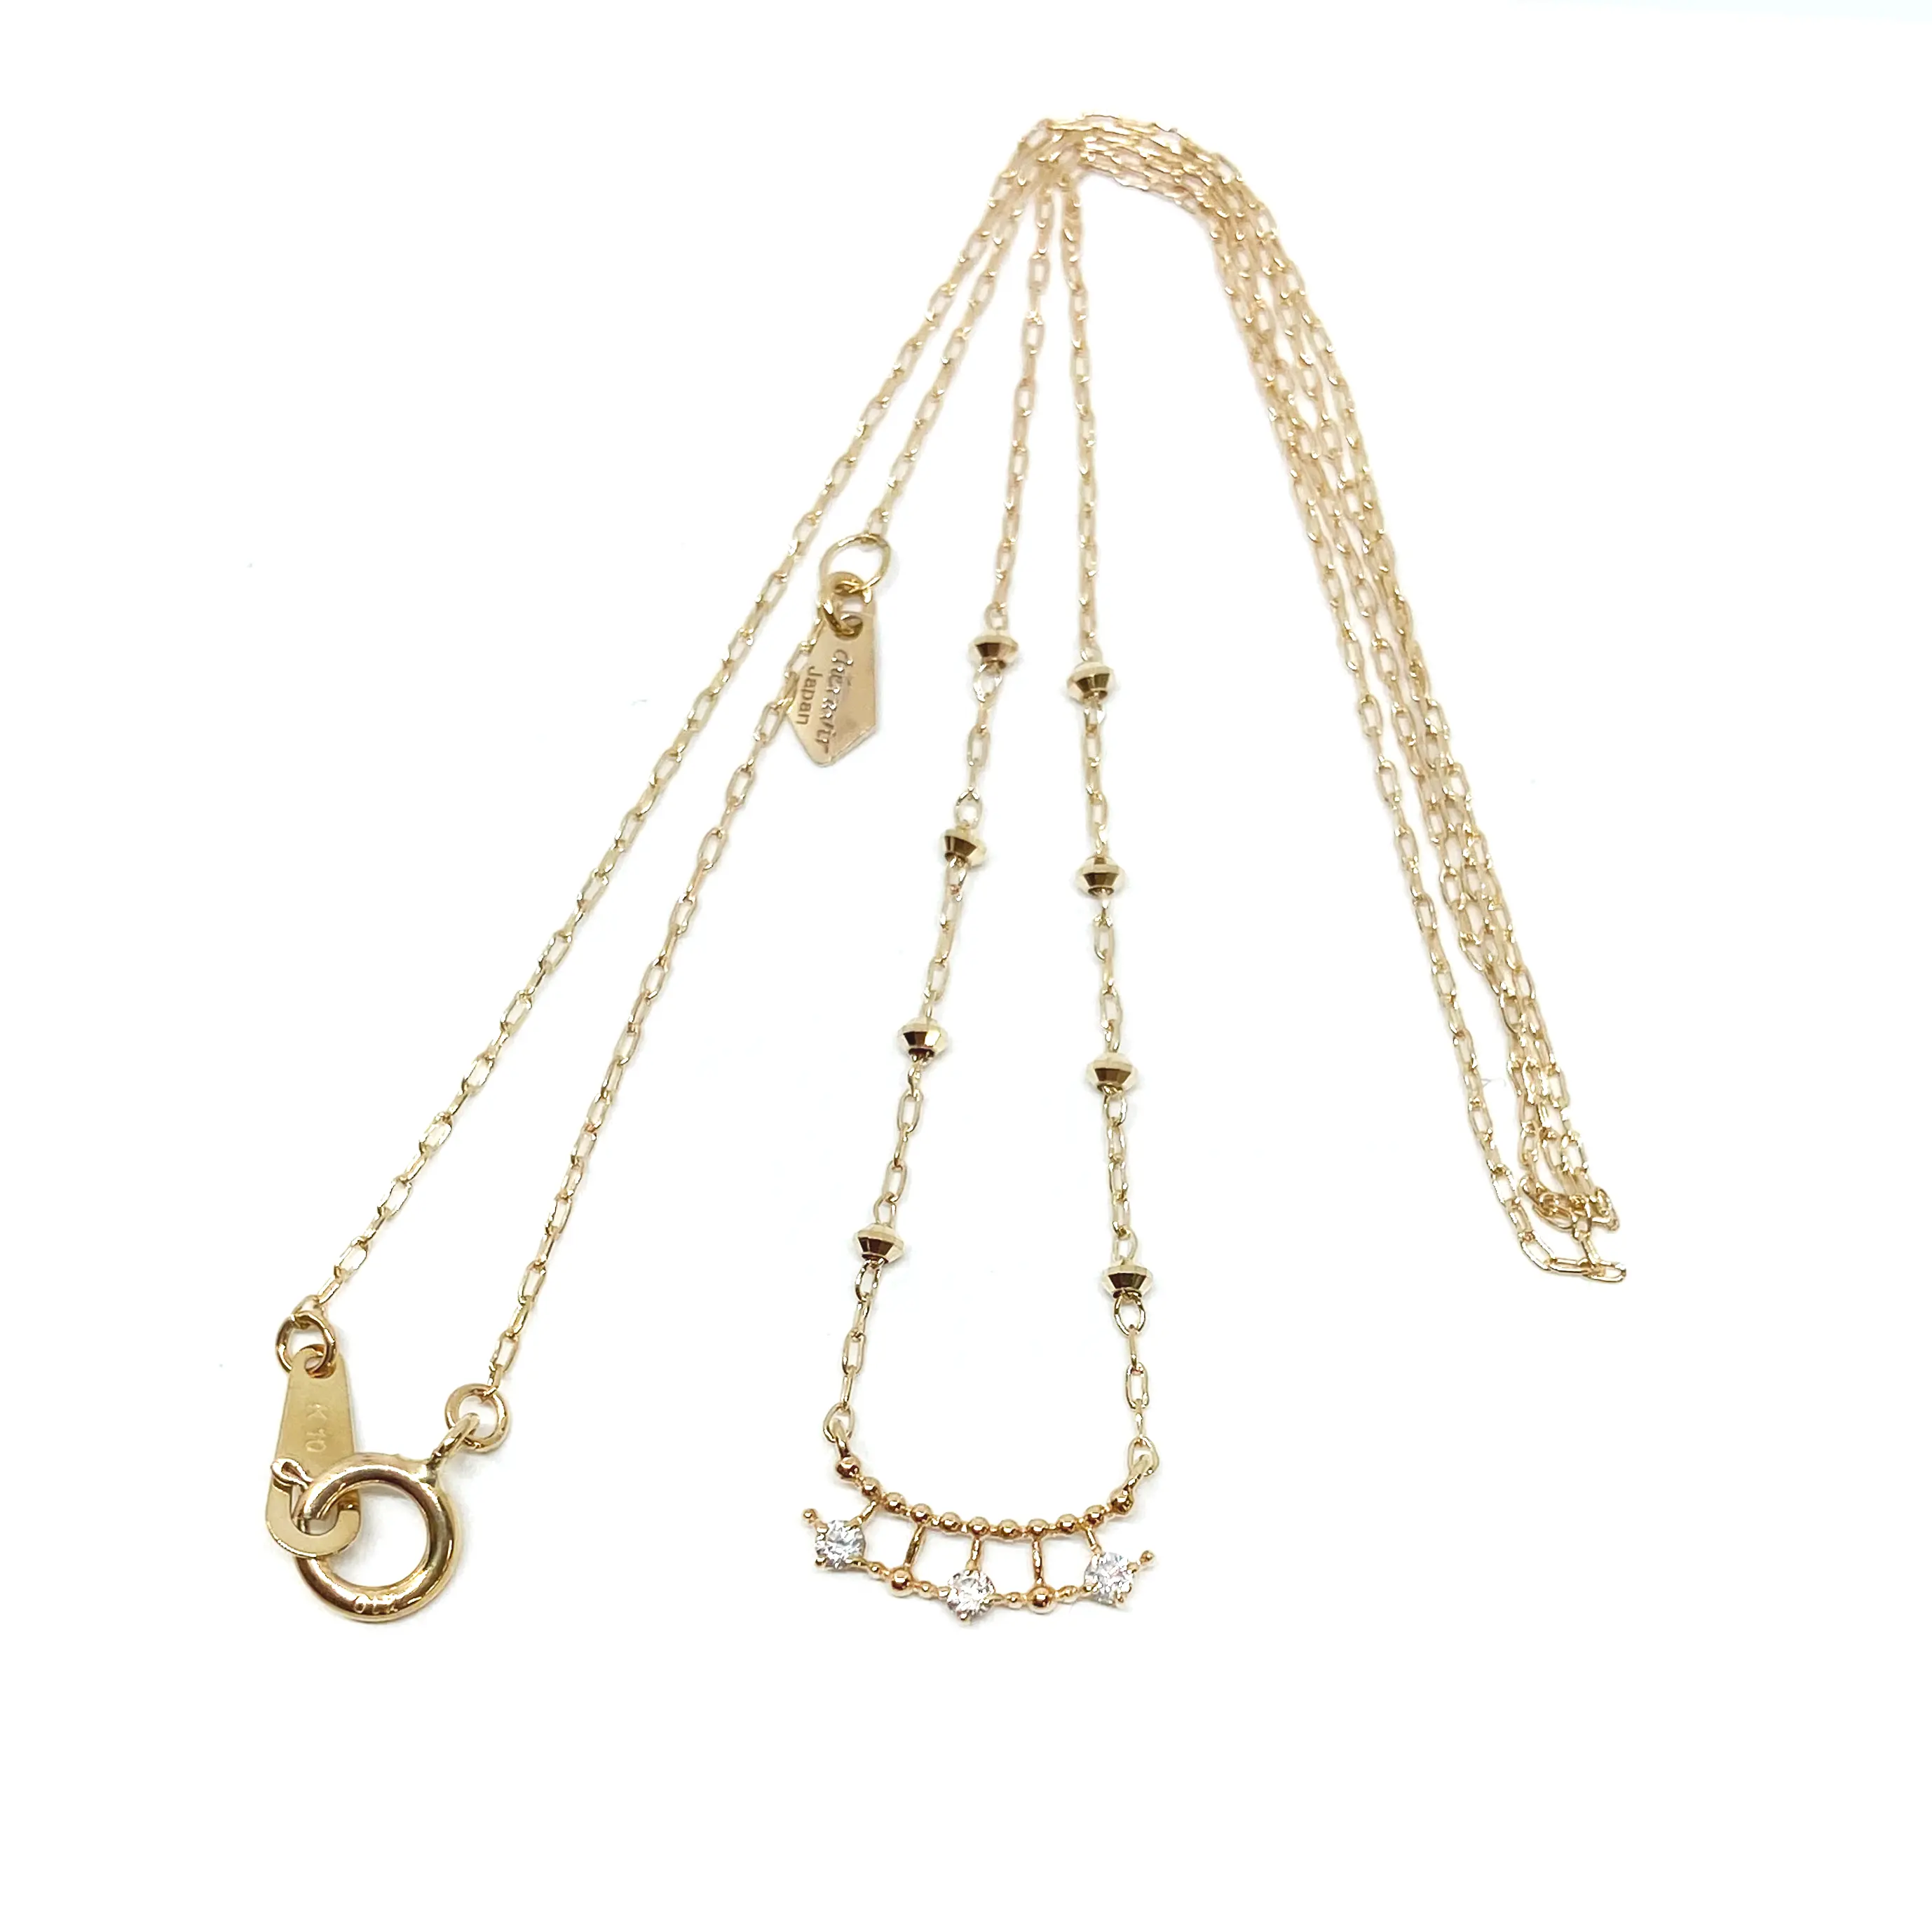 Fashion jewelry wholesale with good reputation good quality modern retro vintage design necklace